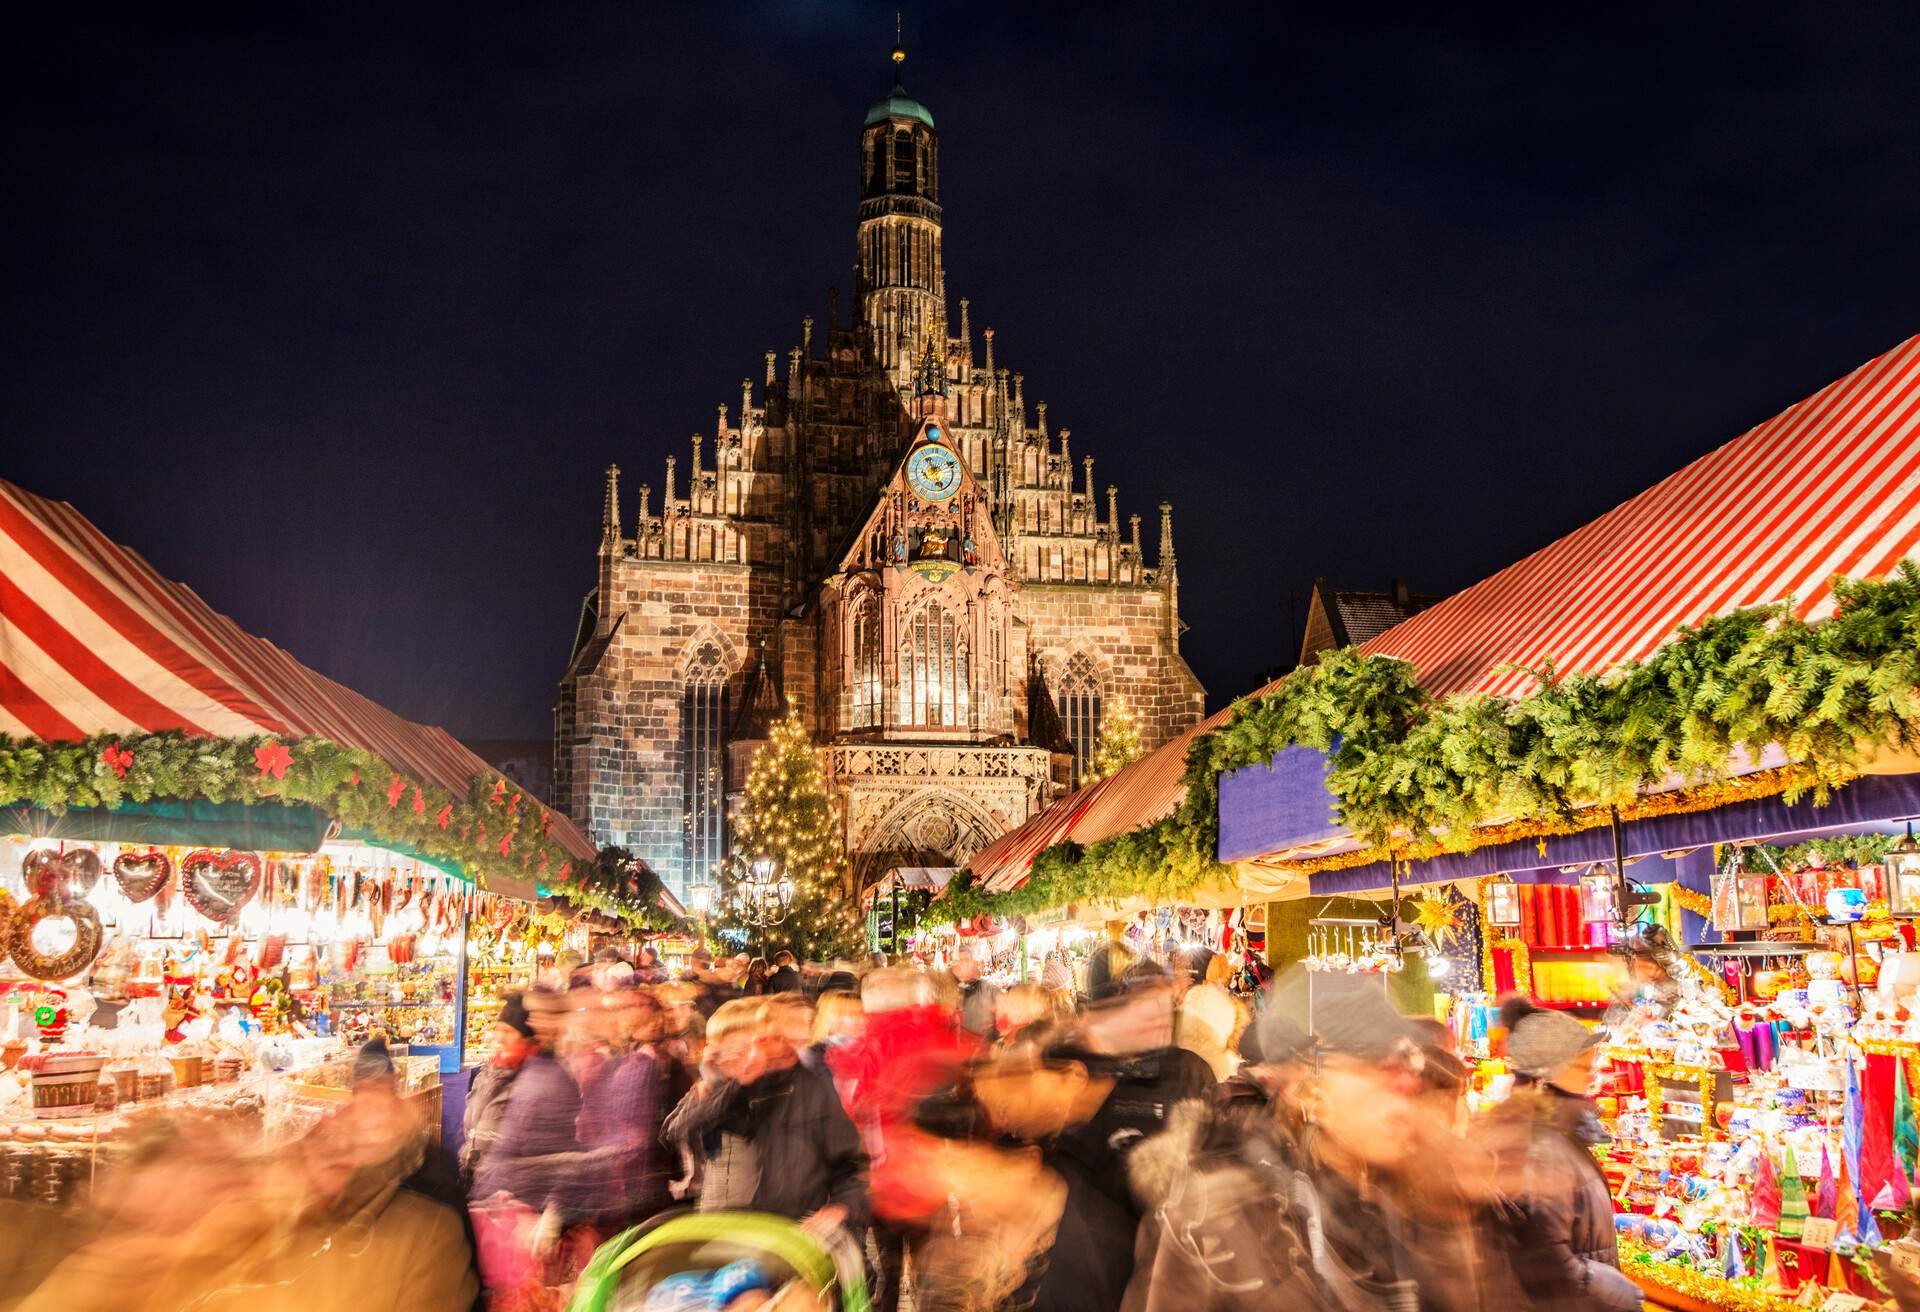 Huge crowd of people moving over Nuremberg´s world-famous christmas market (Christkindlsmarkt) at night, passing colorful illuminated christmas decoration and food stalls. Nuremberg´s landmark Frauenkirche (Church of our Lady) can be seen in the back.